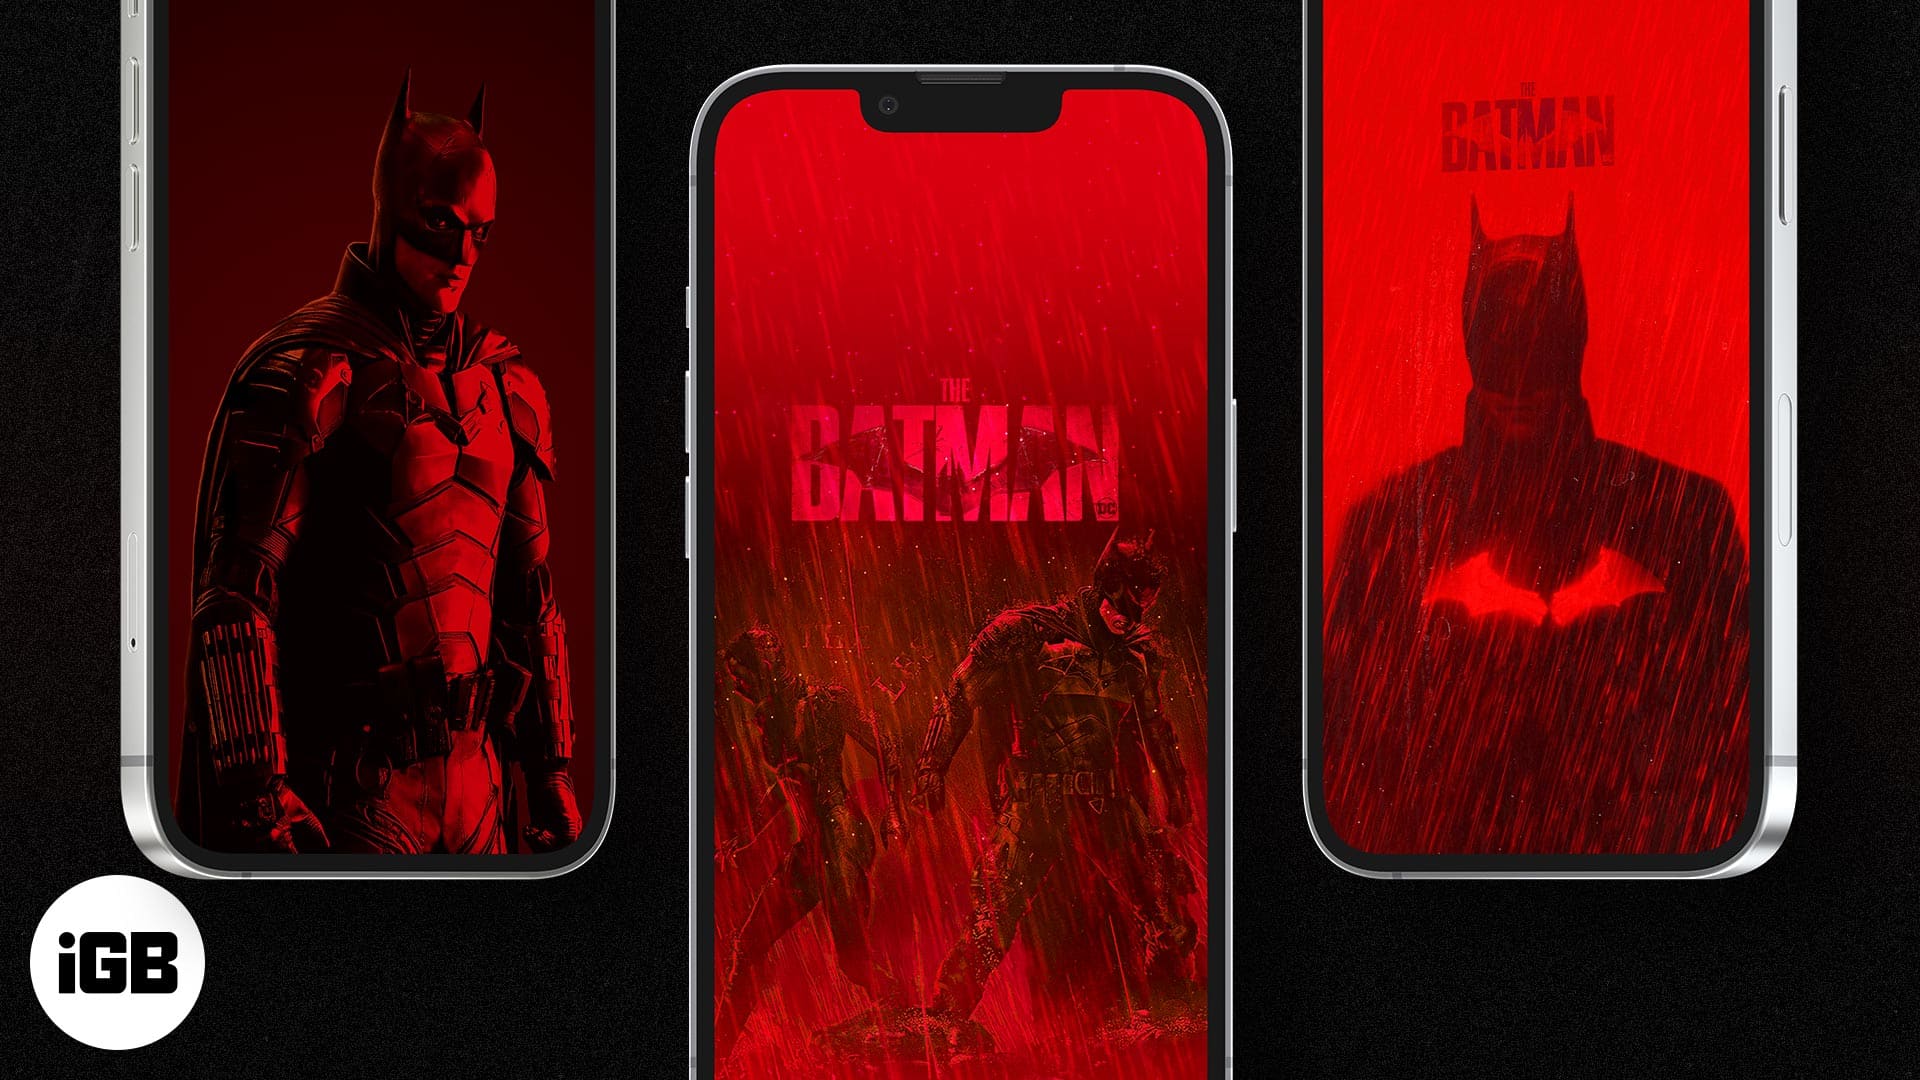 Batman wallpapers for iPhone in 2022